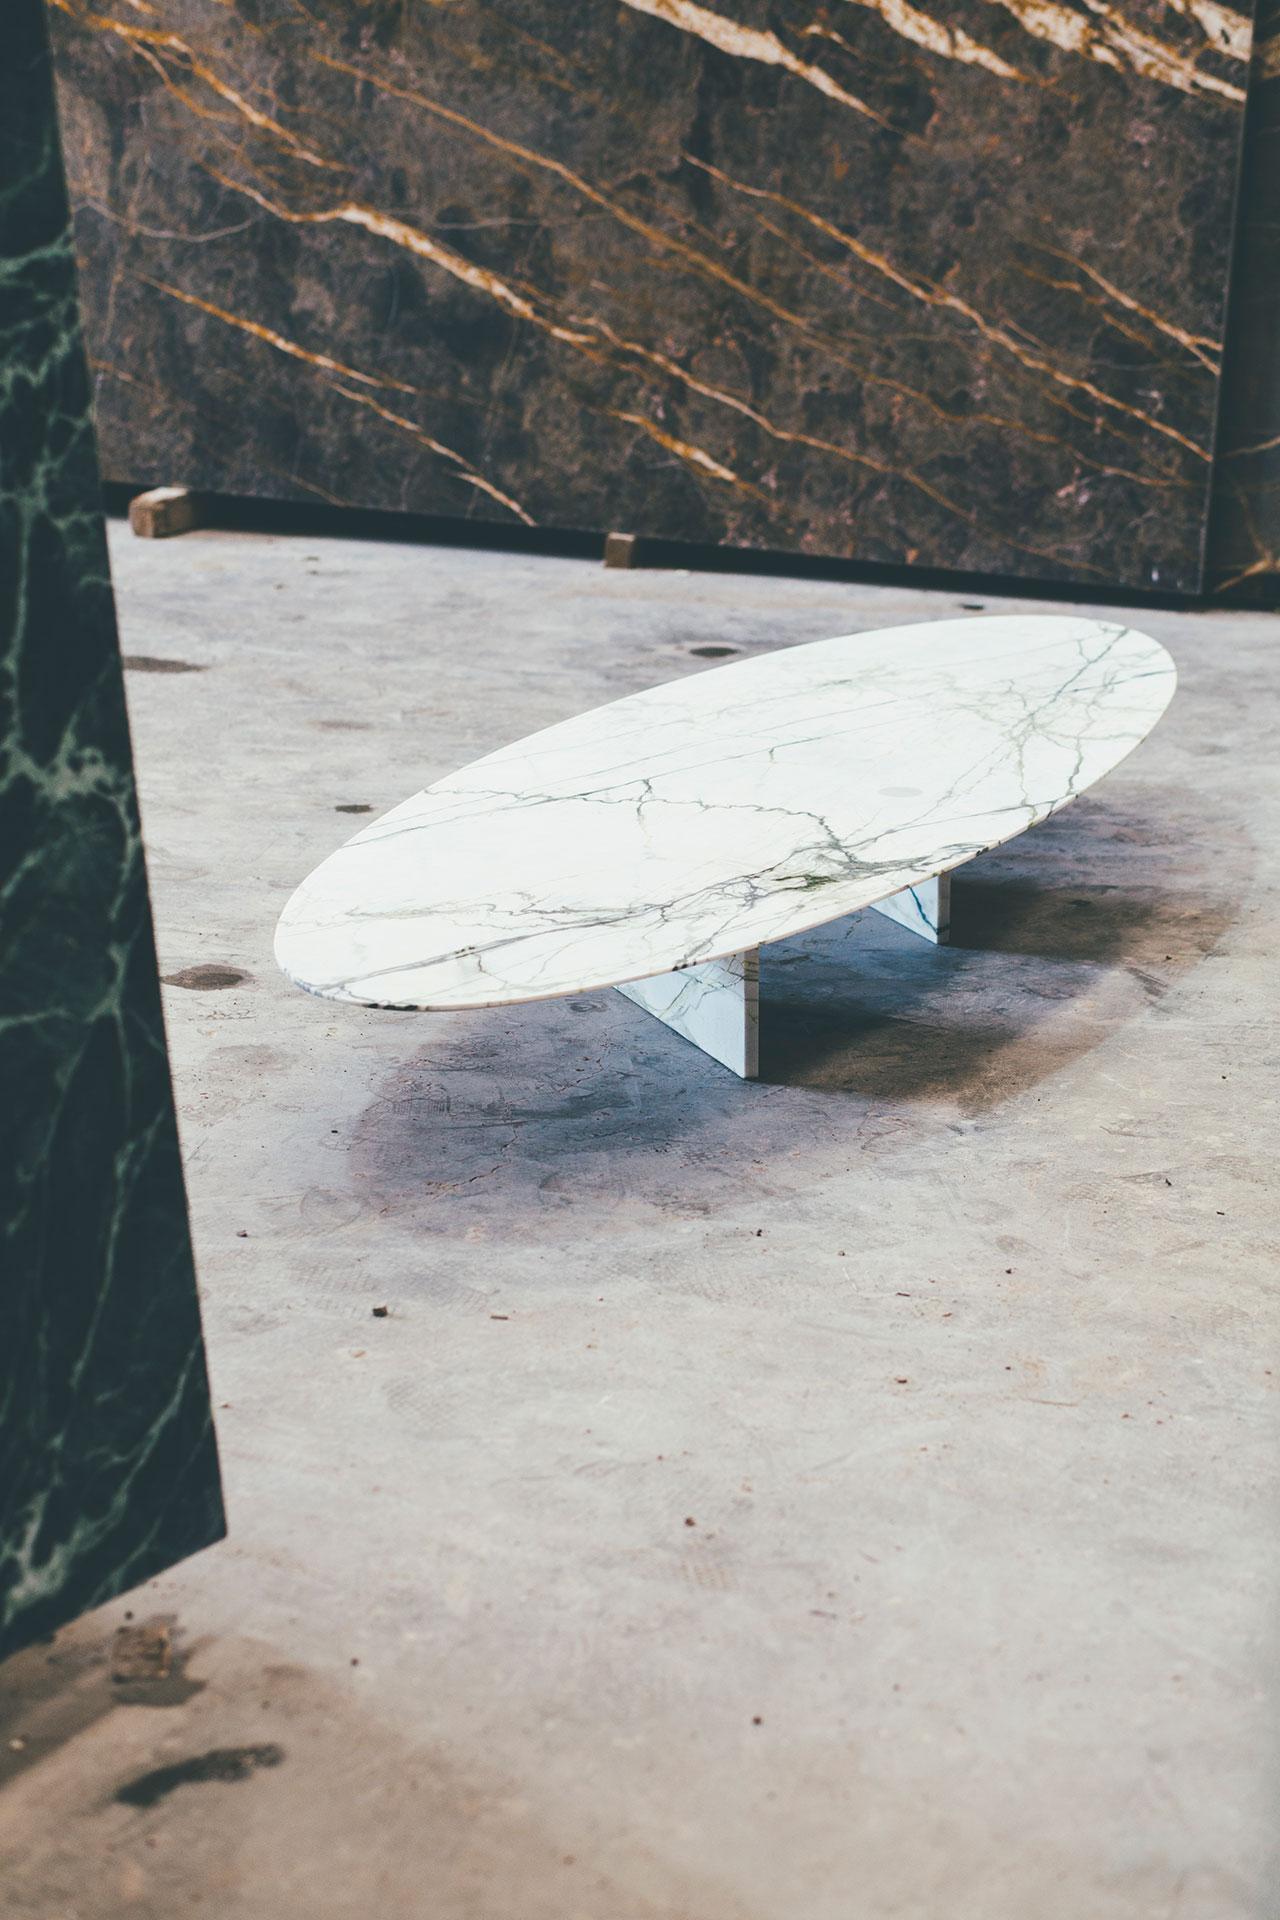 Ellipse low table by Jeroen Thys van den Audenaerde
Dimensions: 23.5 x 220 x 74 cm
Marble and brass.

Made of carefully chosen marble and finished with functional
brass details. These collectible pieces come in a limited edition.

Barh is a